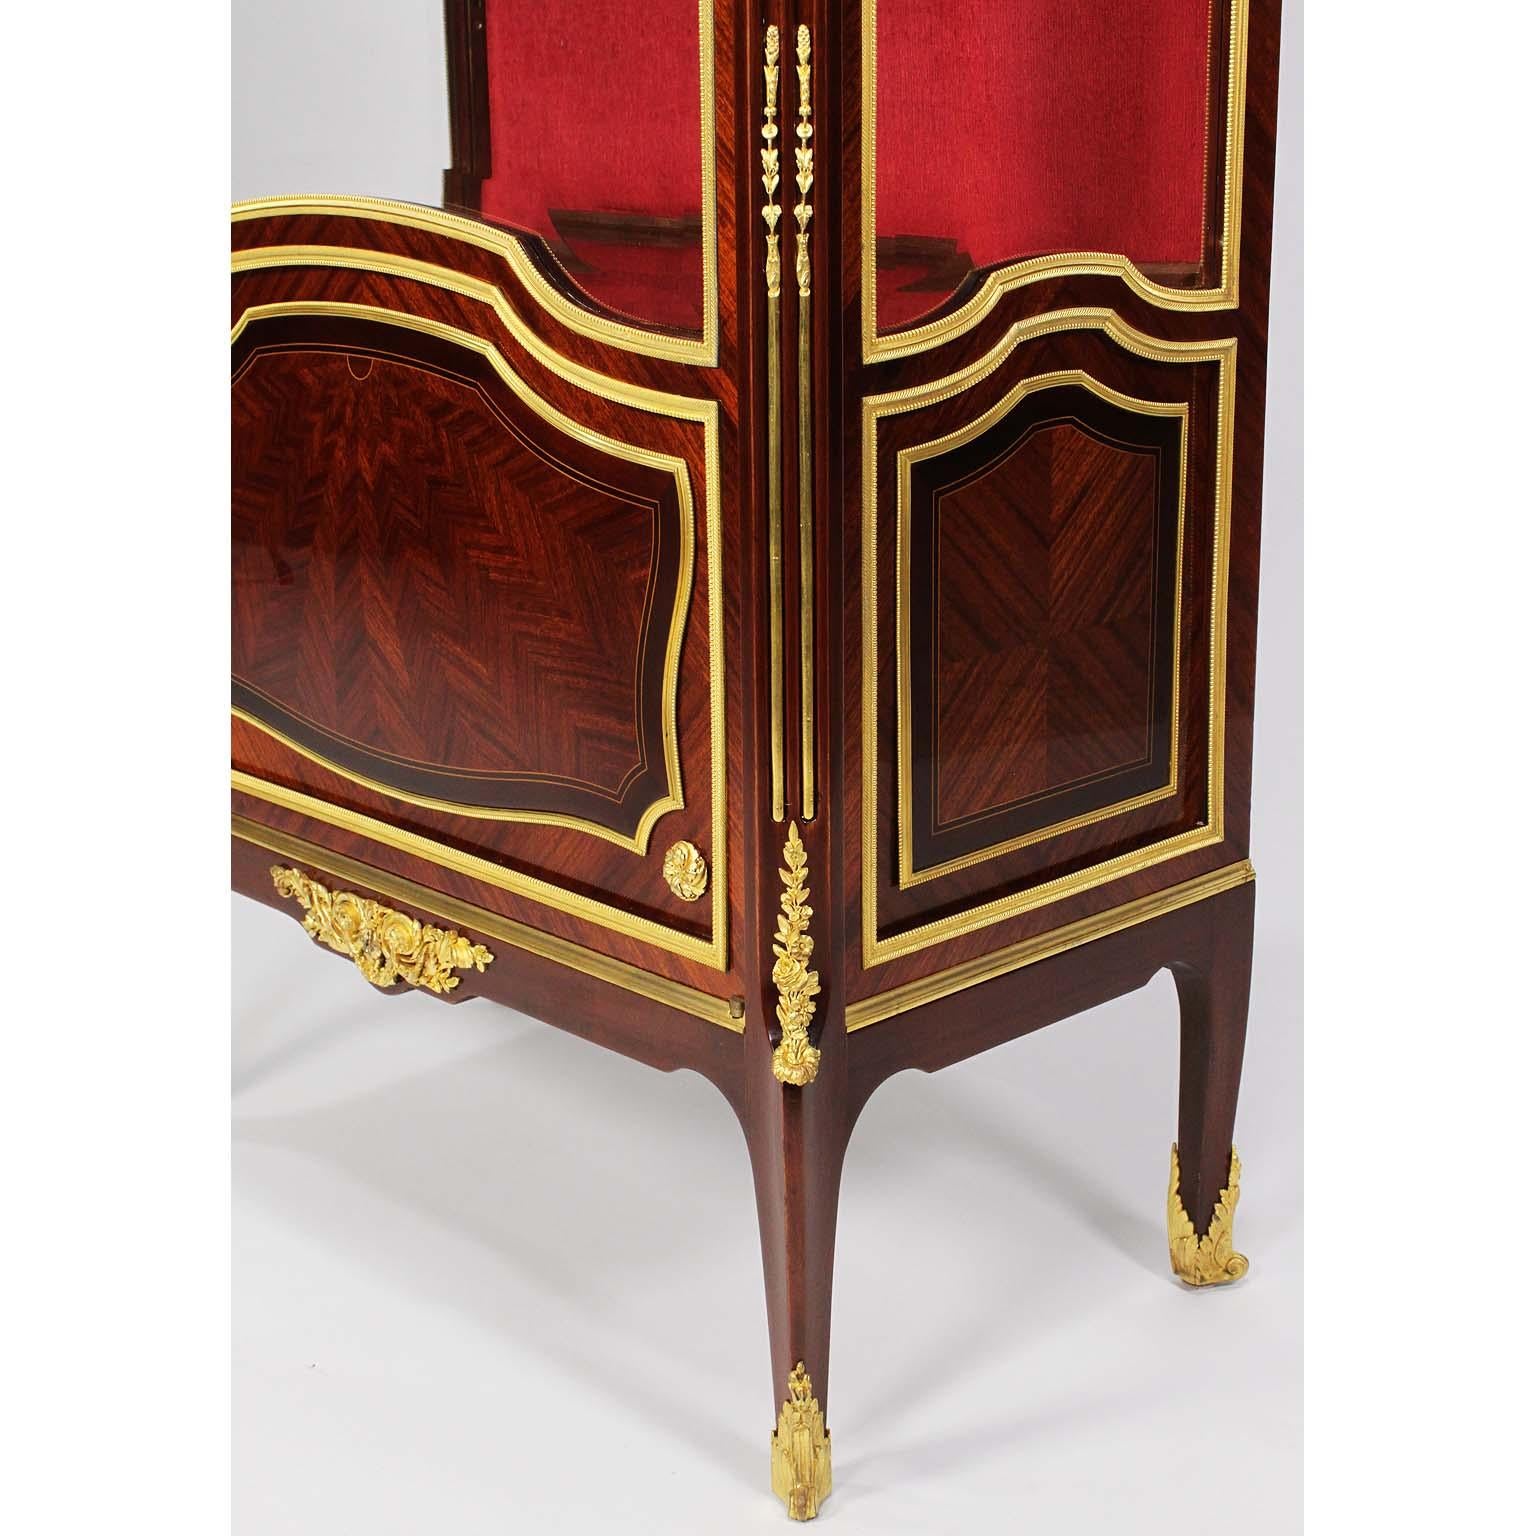 French Louis XV Style Belle Époque Mahogany & Ormolu-Mounted Vitrine Attr. Linke For Sale 4